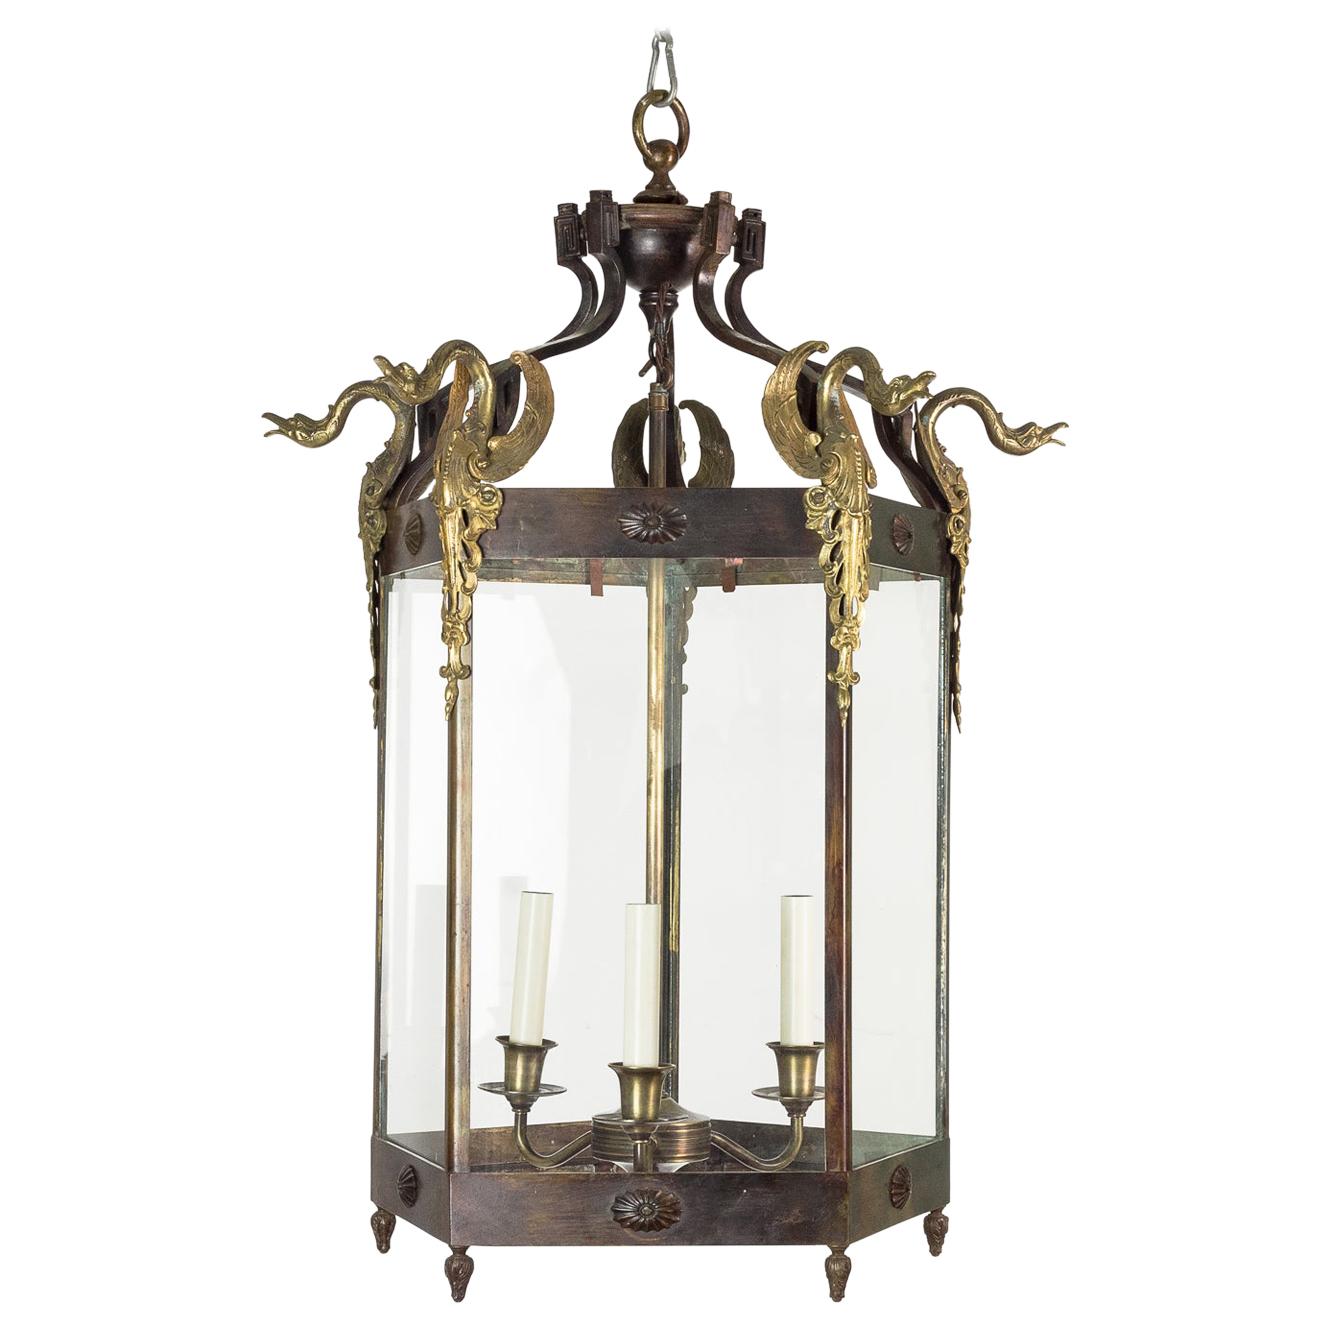 19th Century French Empire Style Hall Lantern For Sale